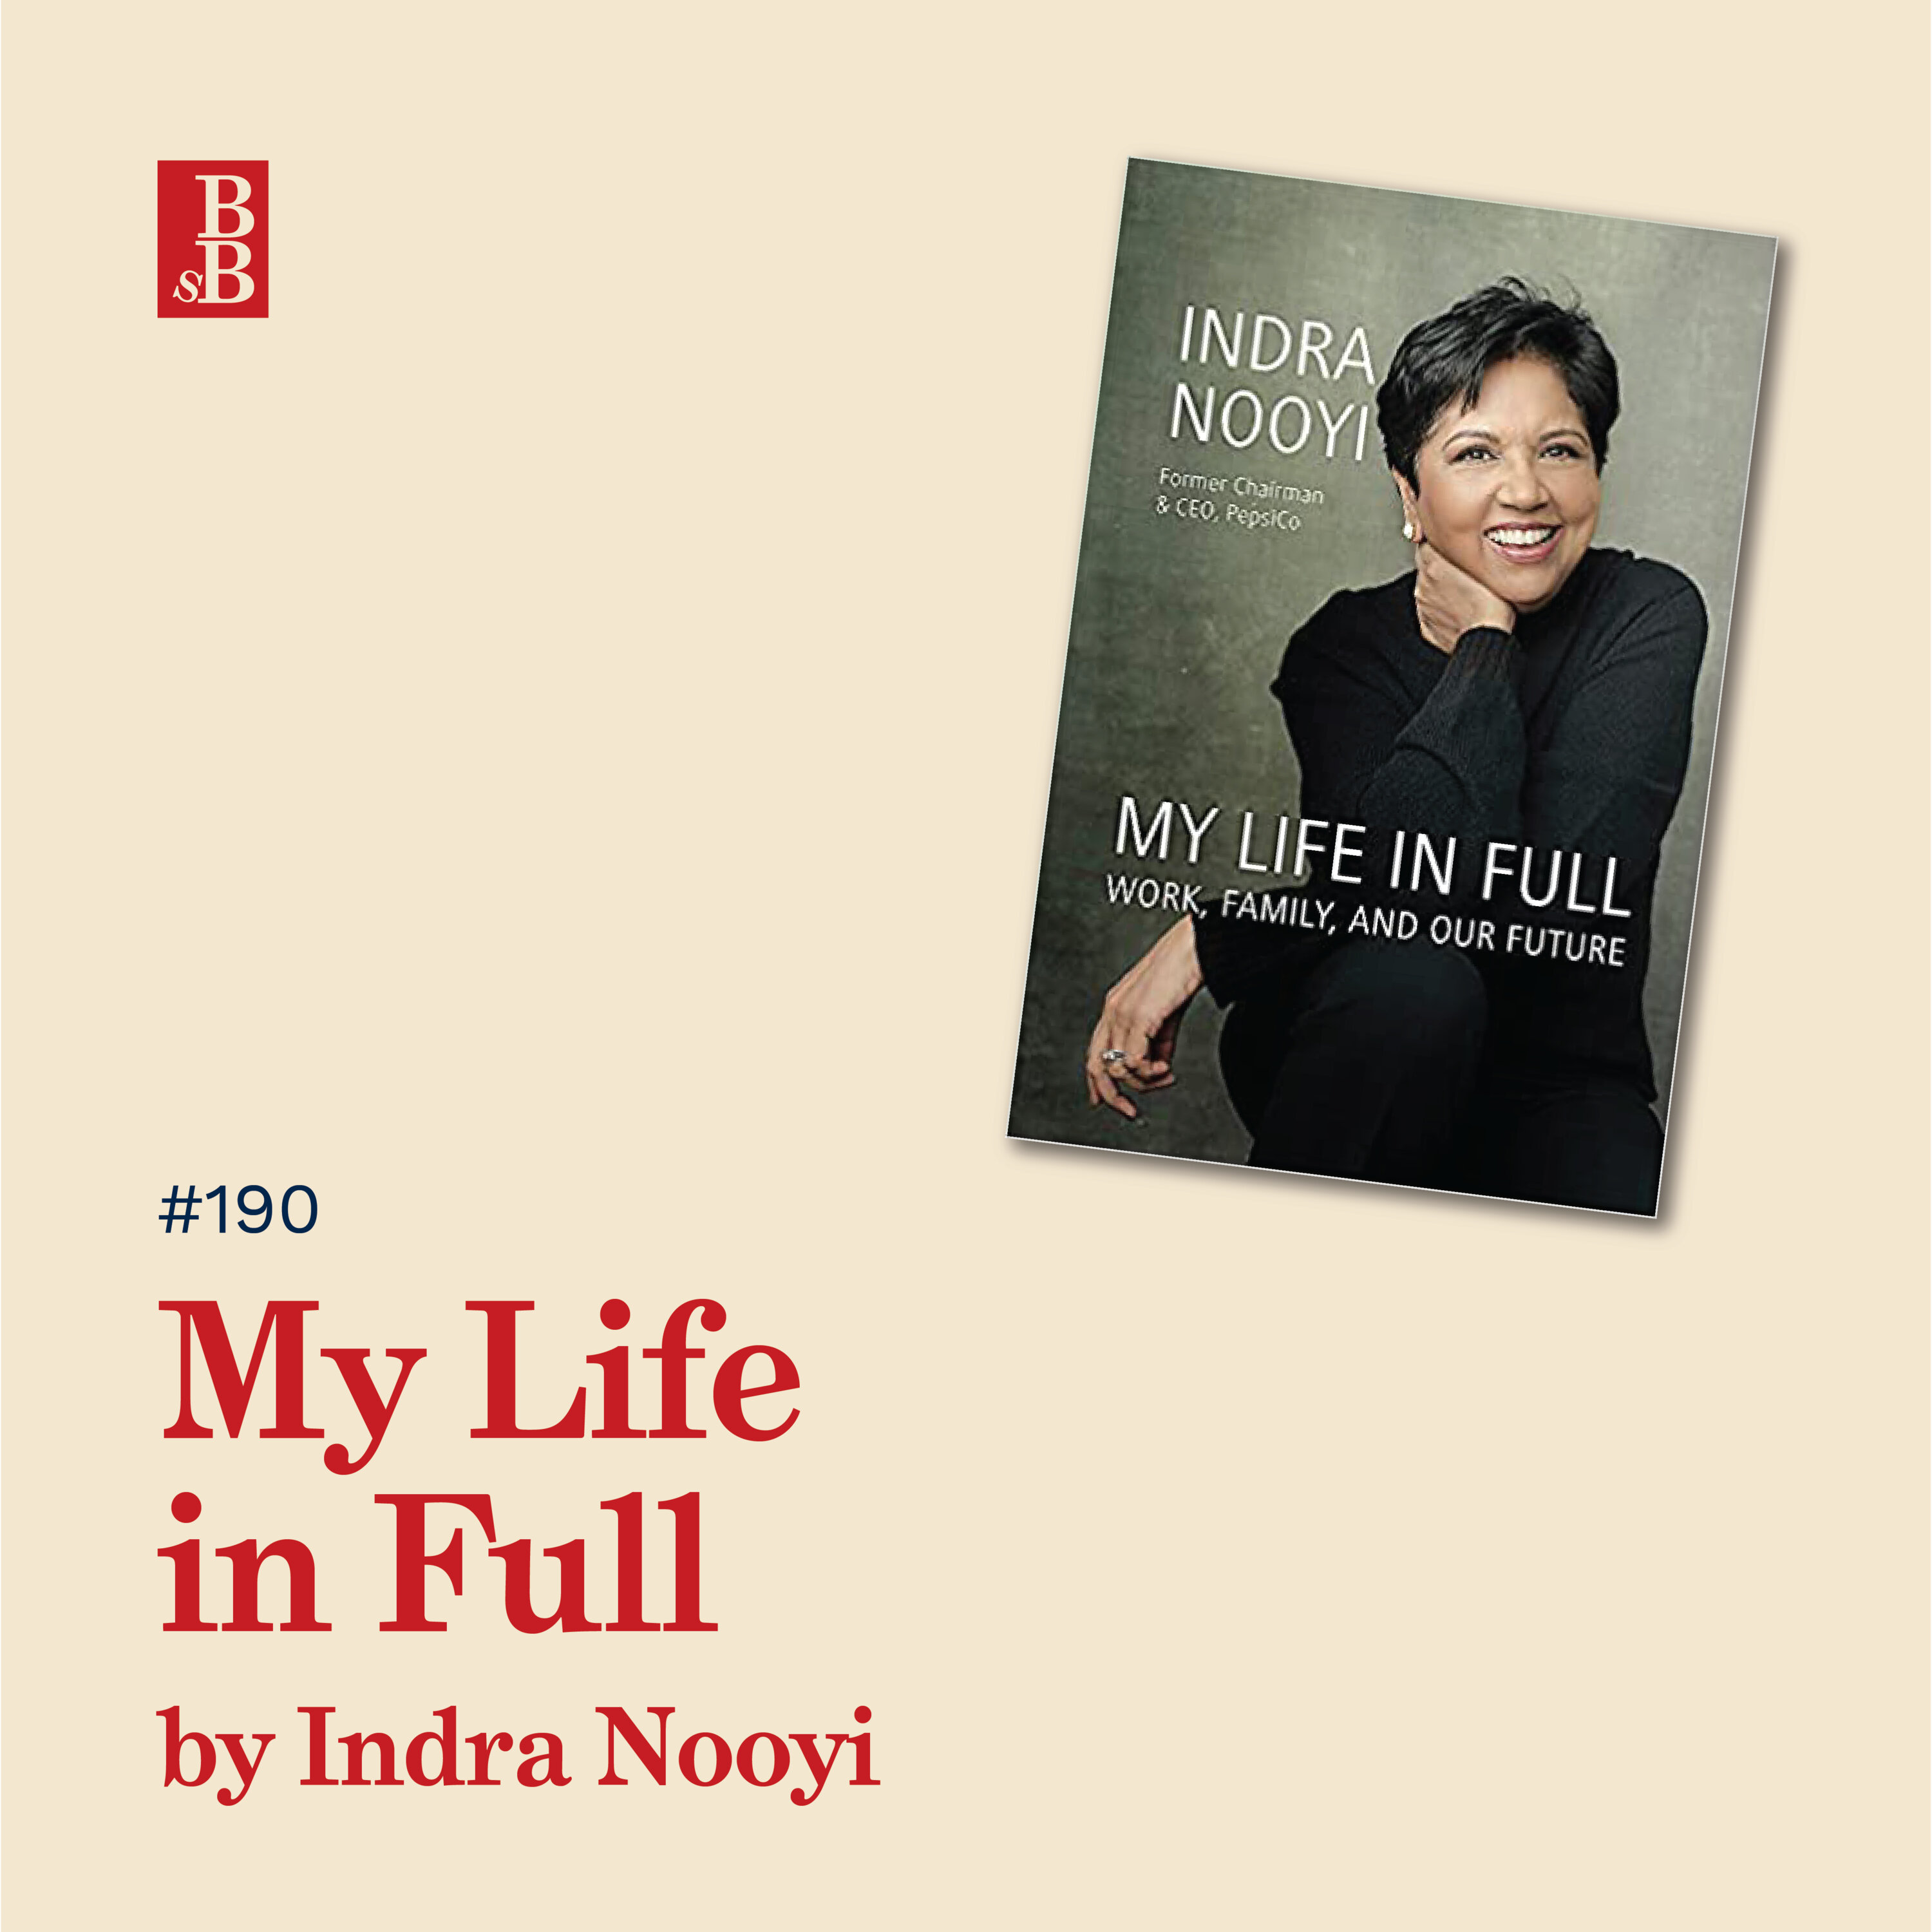 My Life in Full by Indra Nooyi: why you should put purpose and learning at the centre Image